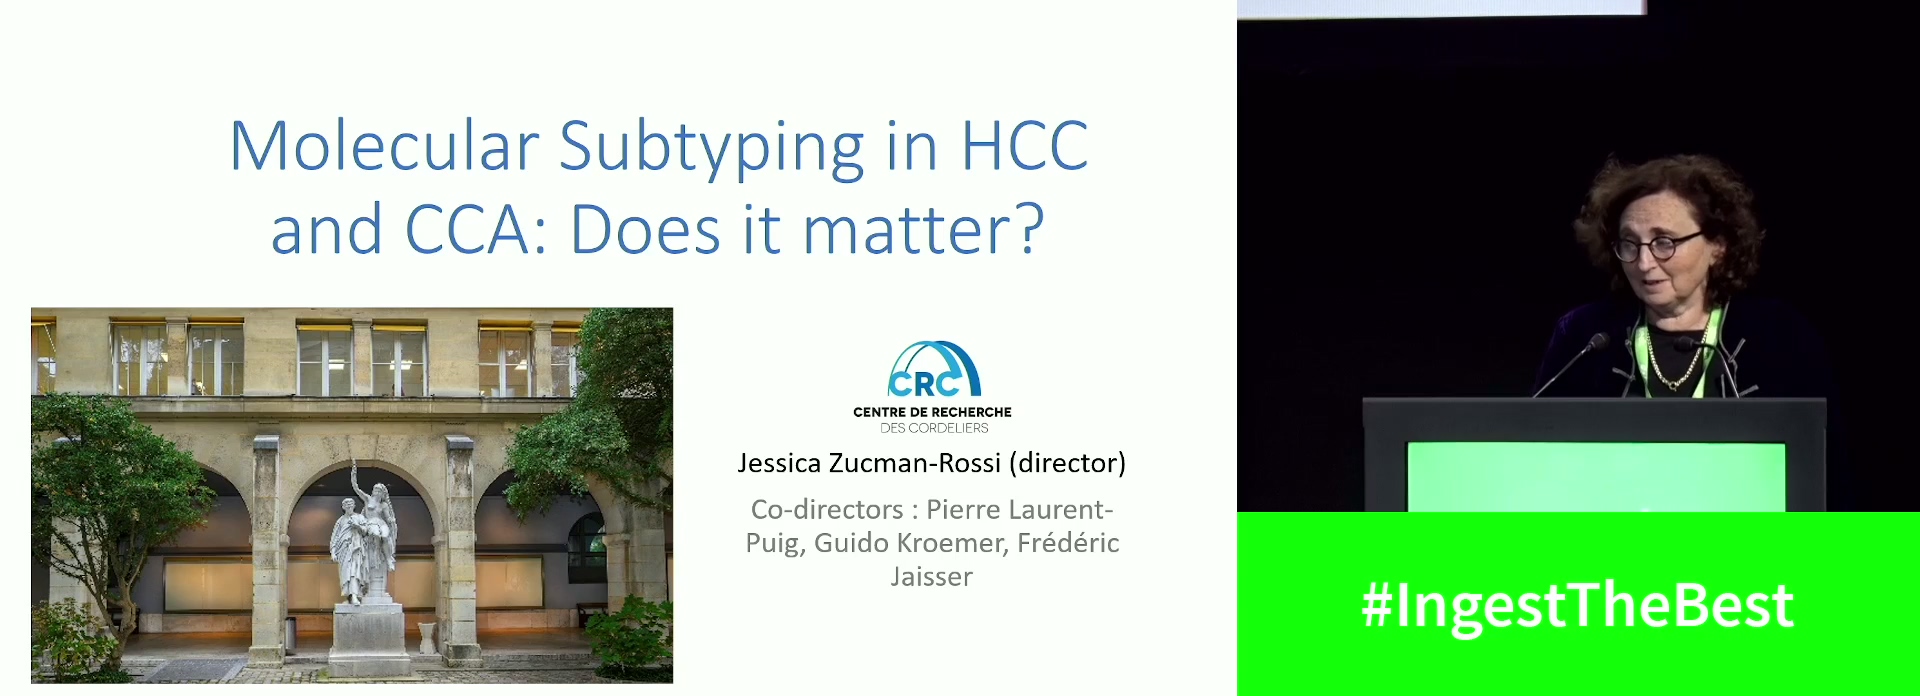 Molecular Subtyping in HCC and CCA: Does it matter?